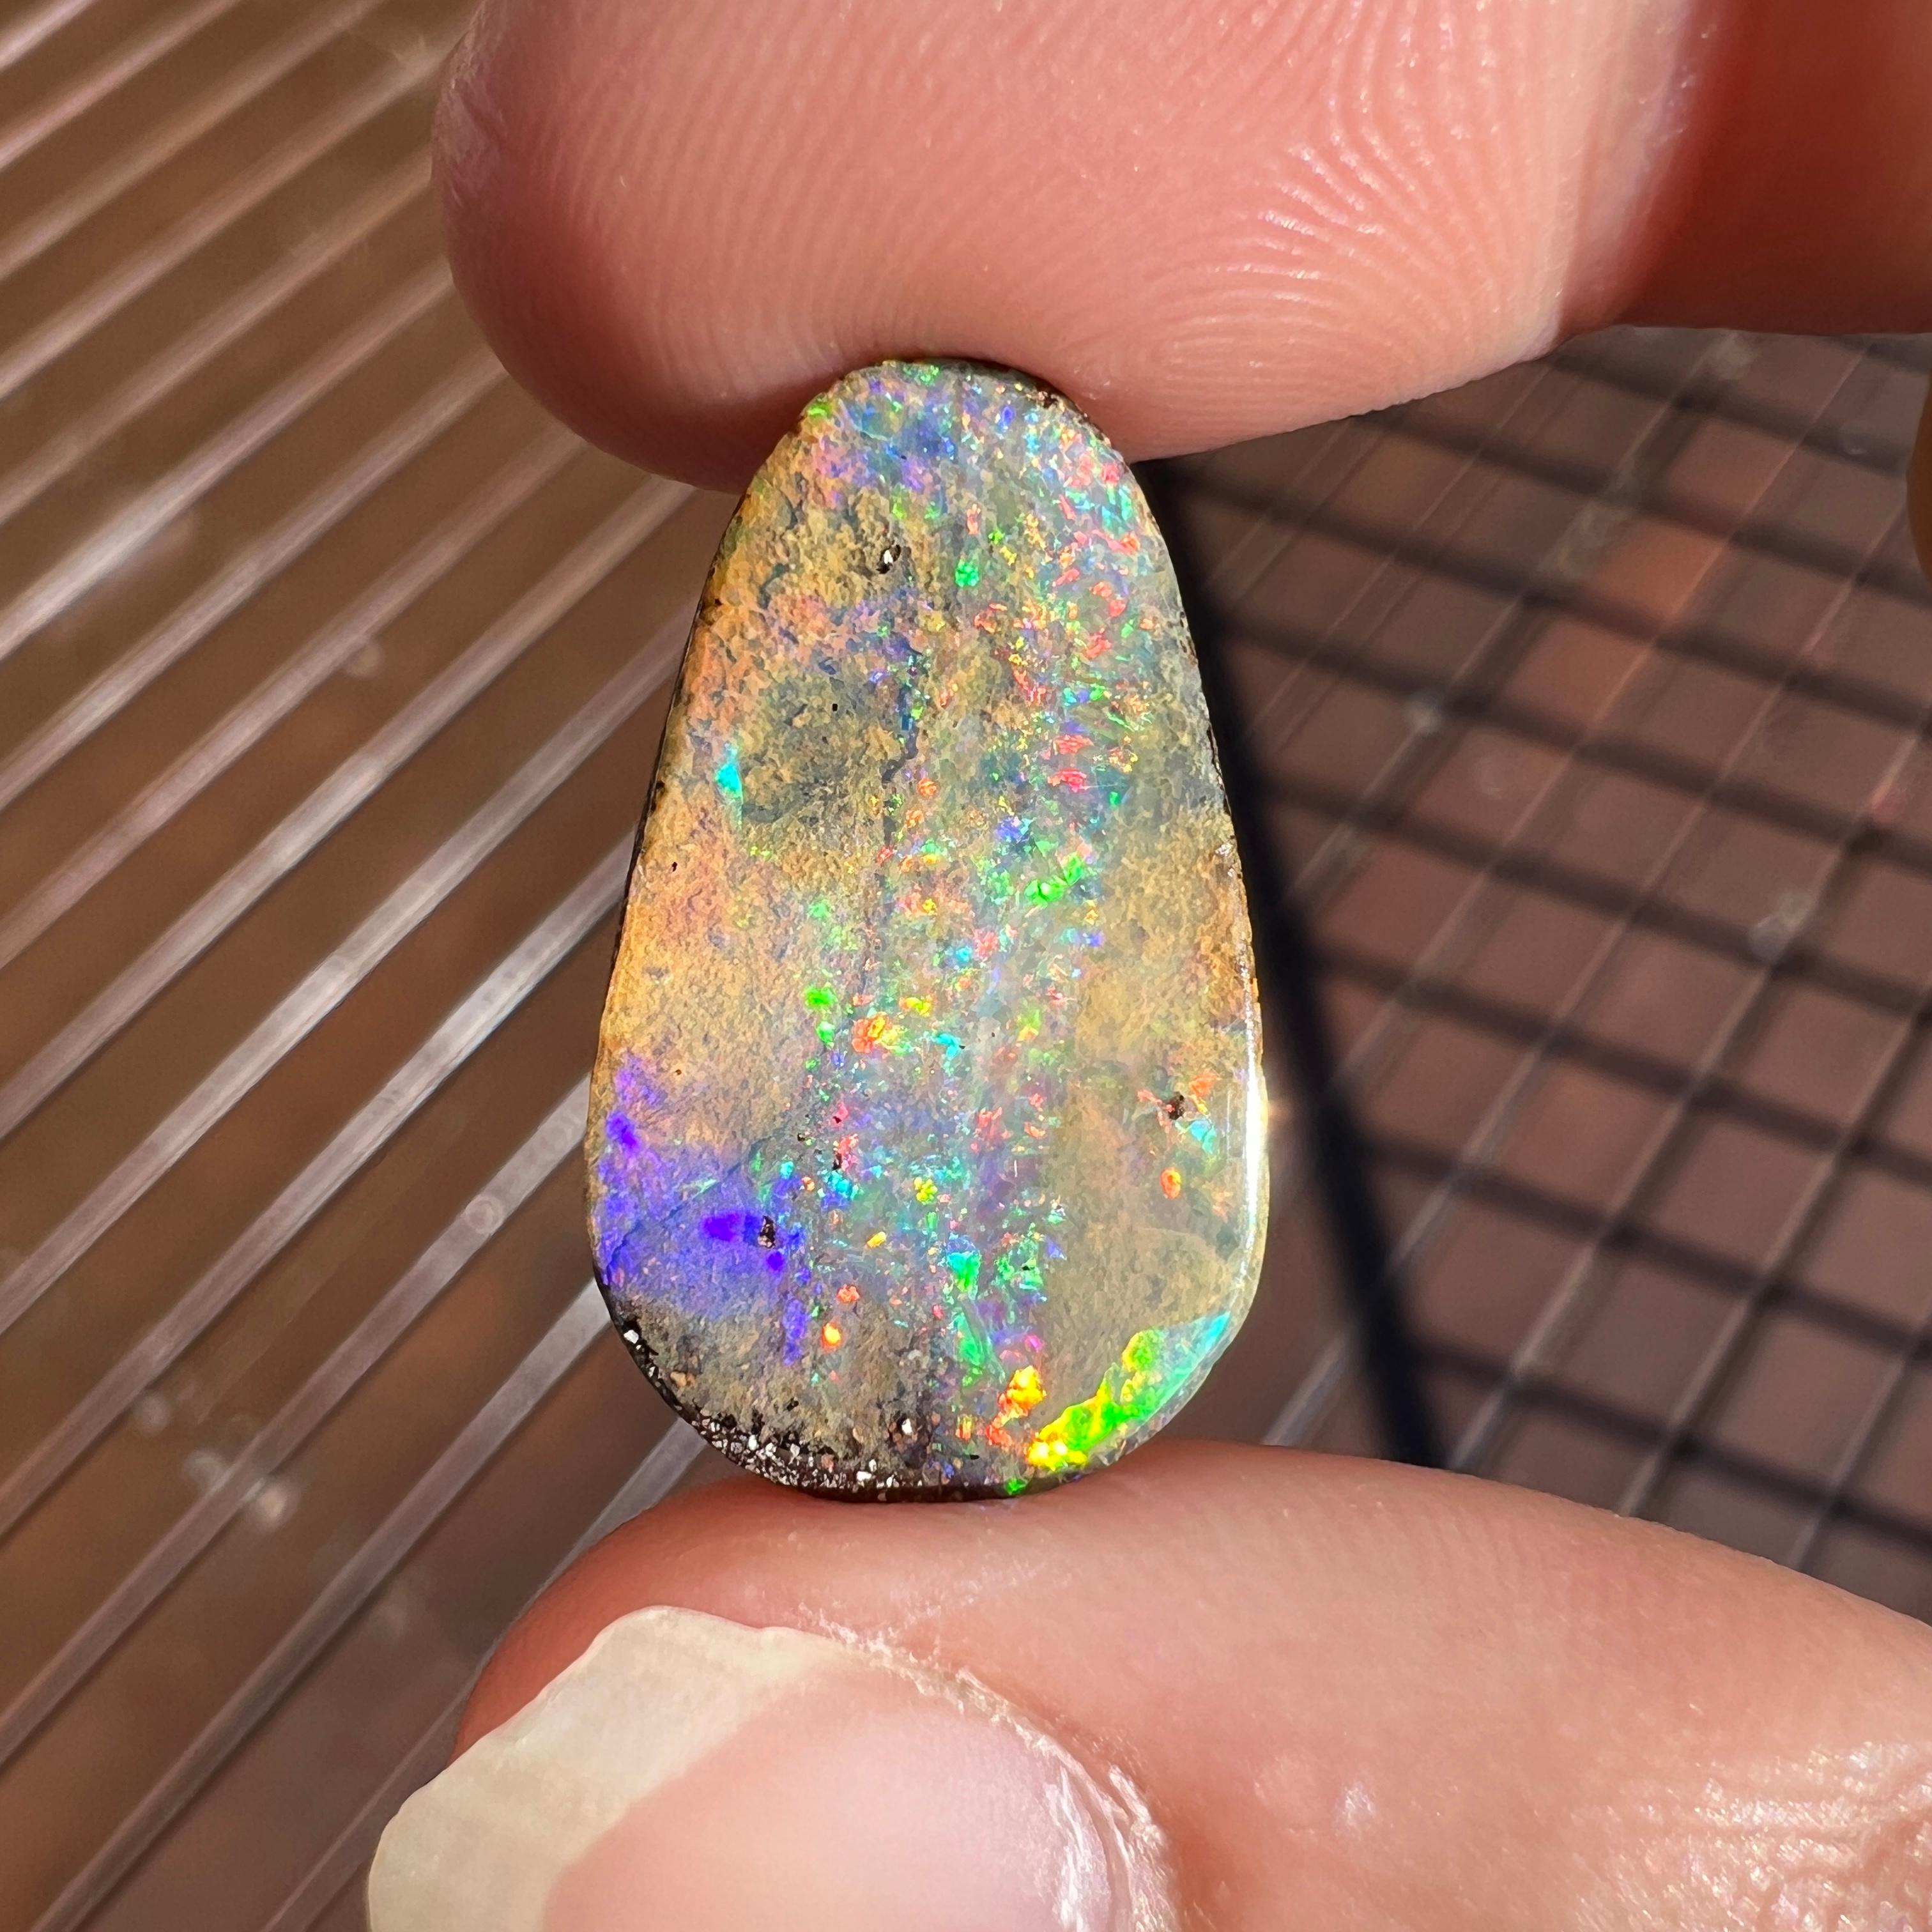 This beautiful 7.66 Ct Australian boulder opal was mined by Sue Cooper at her Mt. Margaret opal mine in western Queensland, Australia in 2024. Sue processed the rough opal herself and cut into into a free-form shape. We love turquoise, sea green and